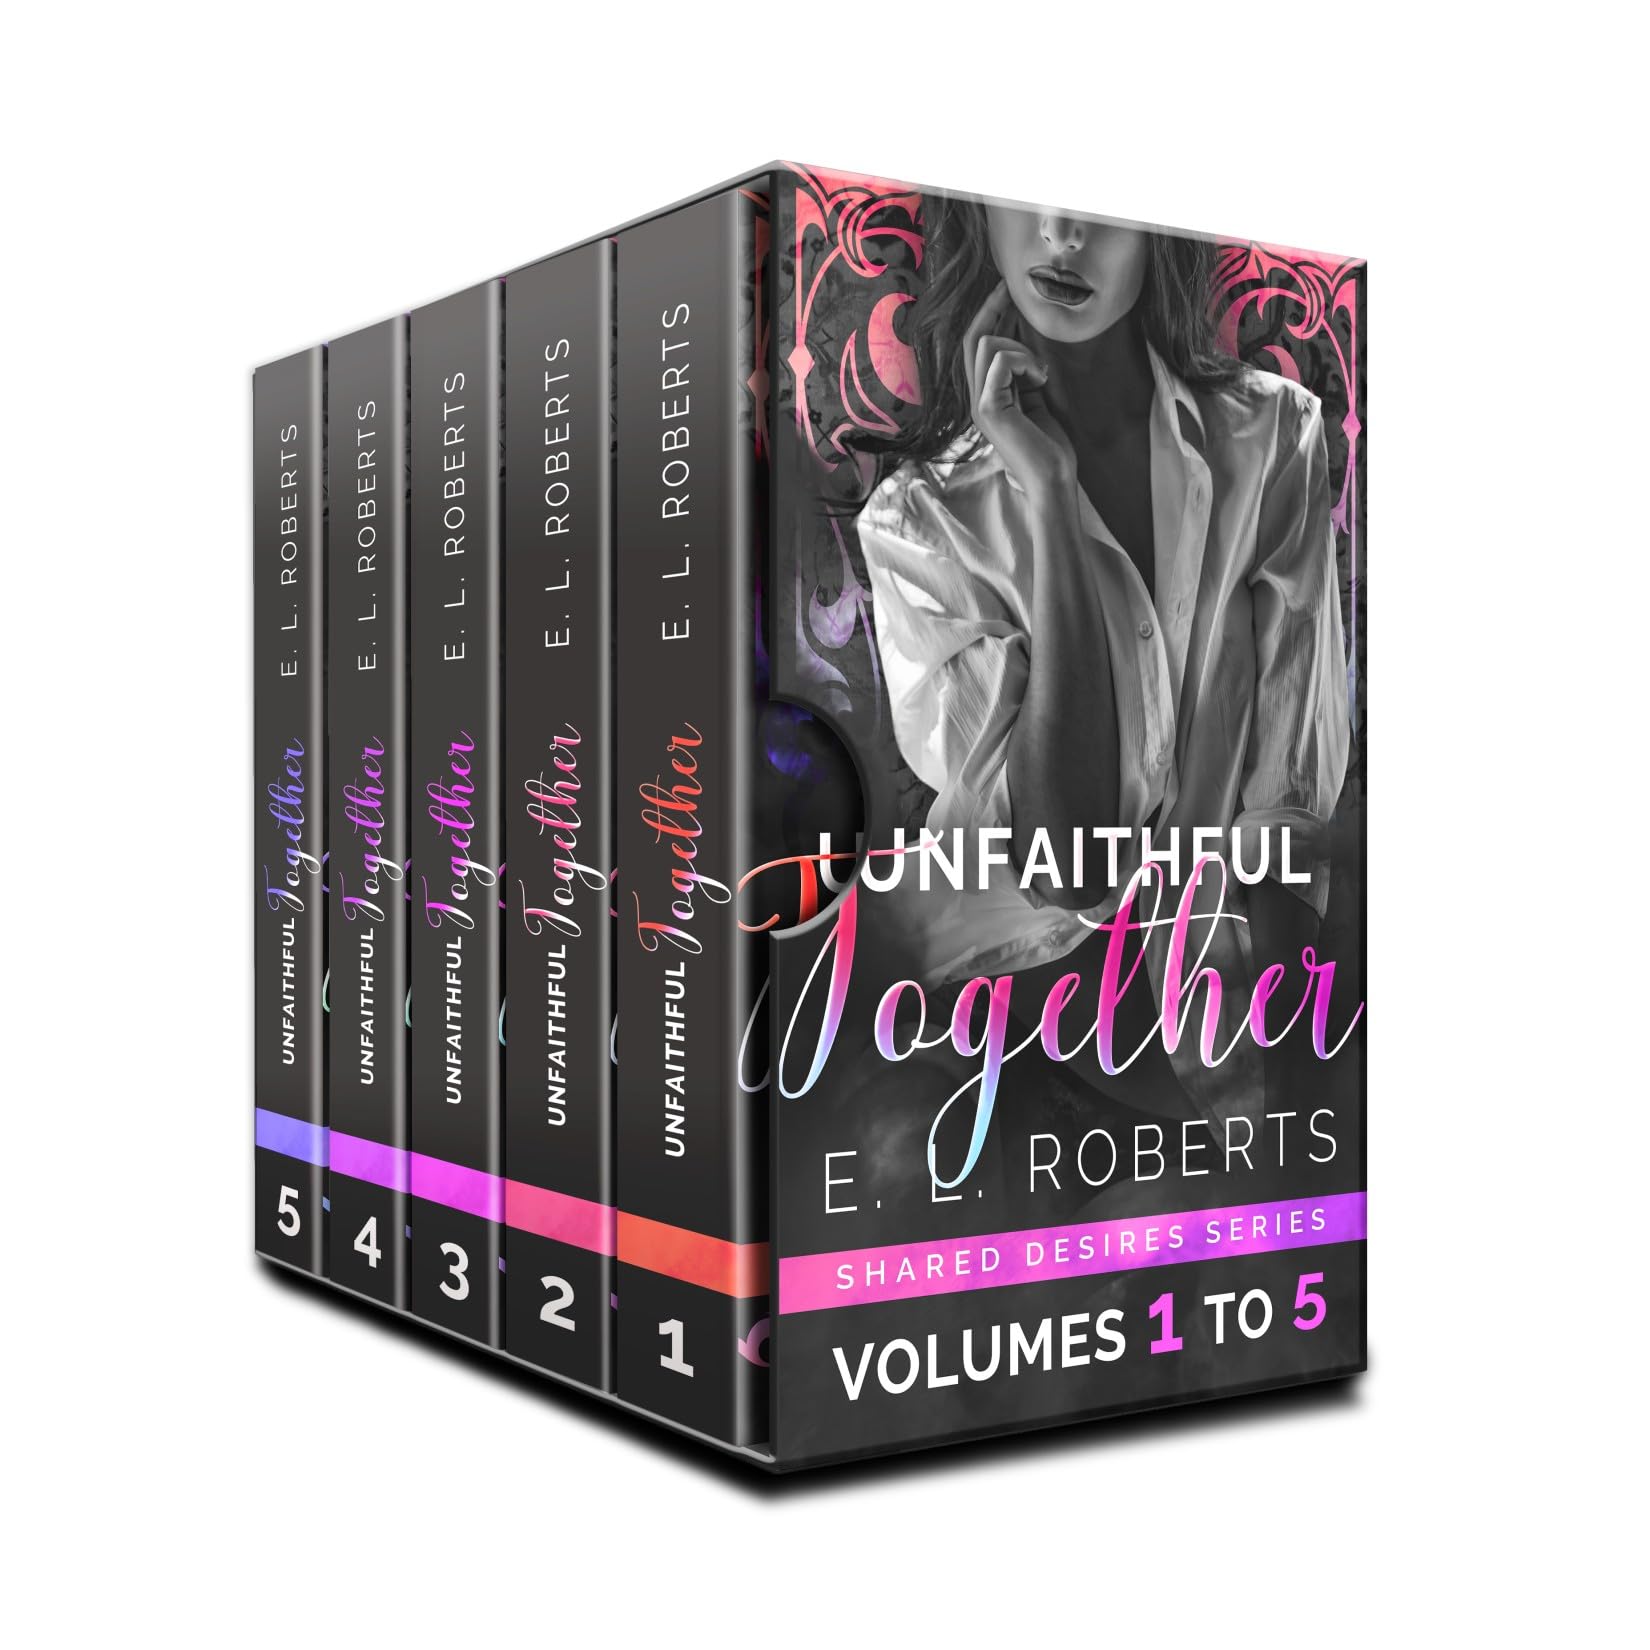 Unfaithful Together Volumes 1 to 5: Connected series of steamy, romantic, short stories (Shared Desires - connected steamy romantic shorts)